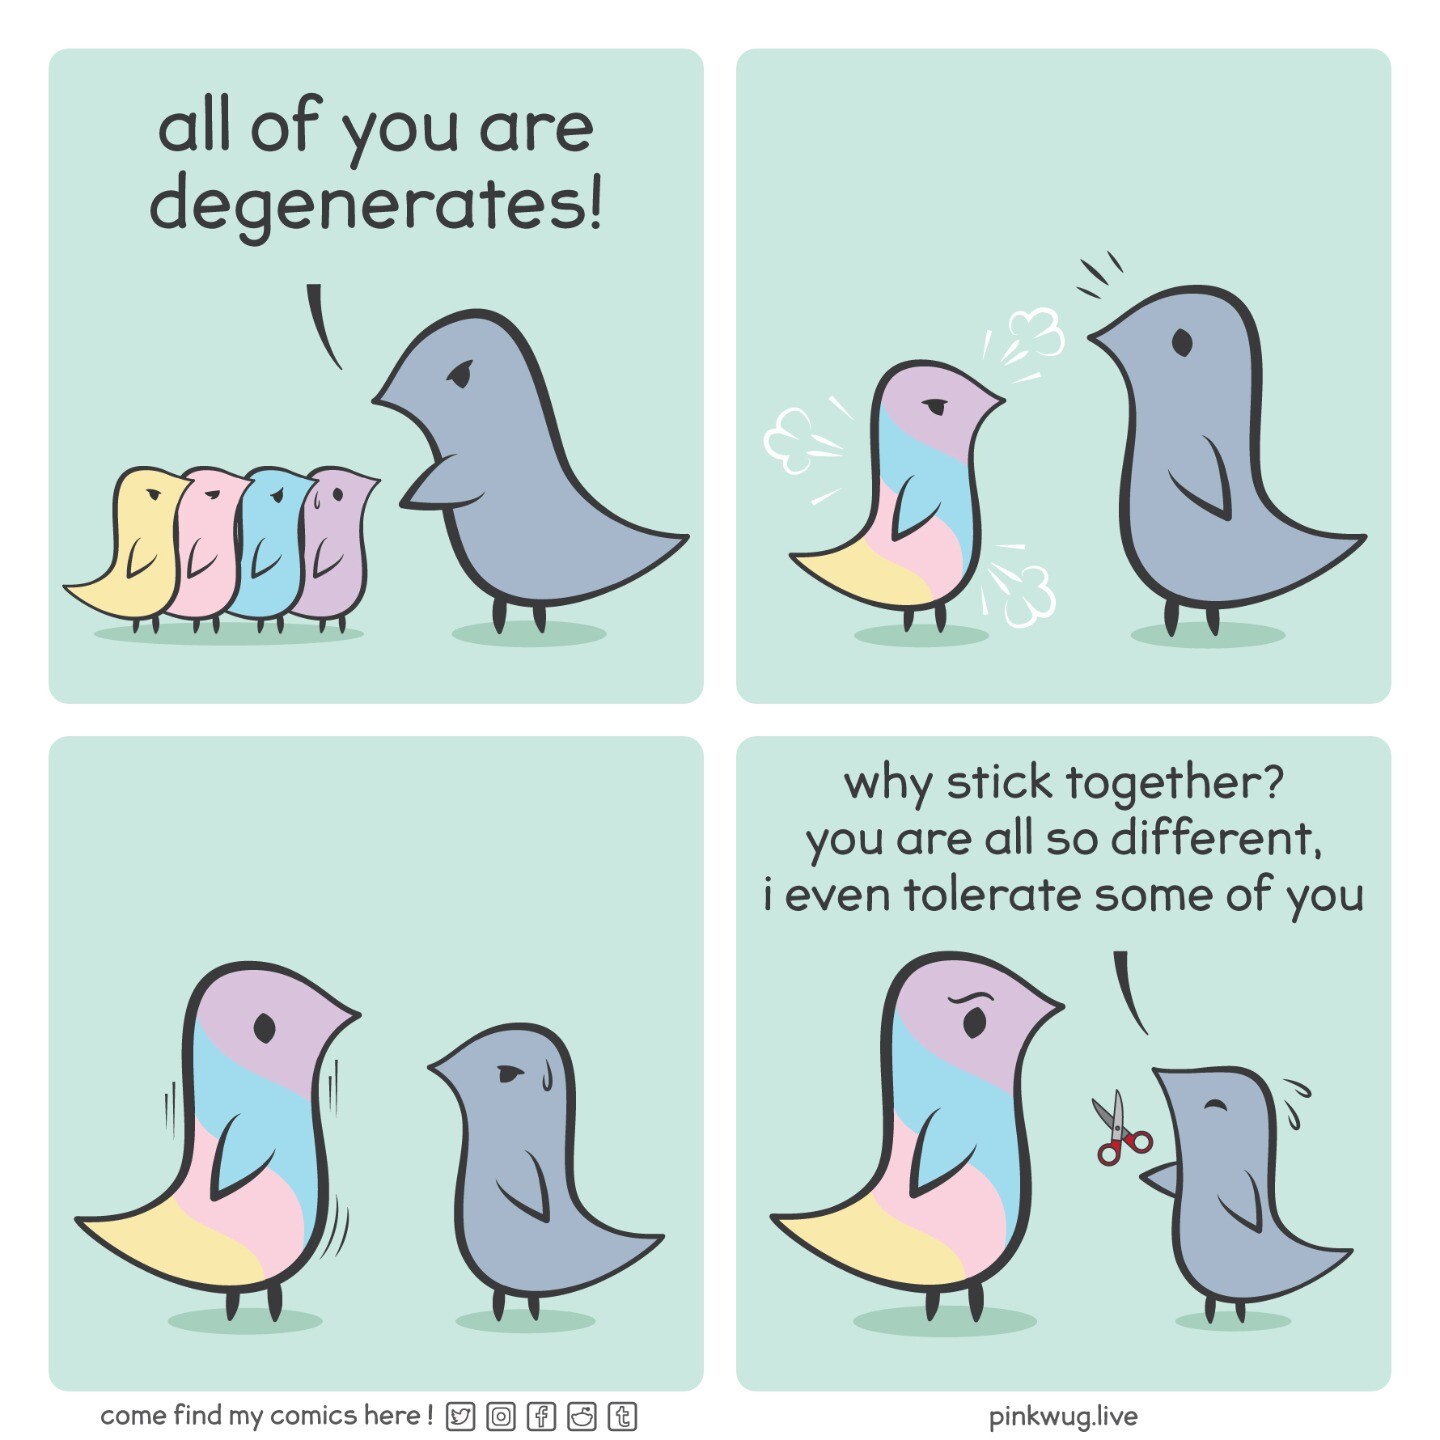 Panel 1: A grey wug stands over 4 wugs of different colors says "all of you are degenerates" Panel 2: The 4 wugs merge into a bigger multicolor wug to the surprise of the grey wug Panel 3: The multicolor wug grows, the grey wug looks worried Panel 4: The <br />multicolor wug is now bigger than the grey wug. The grey wug tries to hand it a scissor and says worried: "why stick together? you are all so different, i even tolerate some of you"